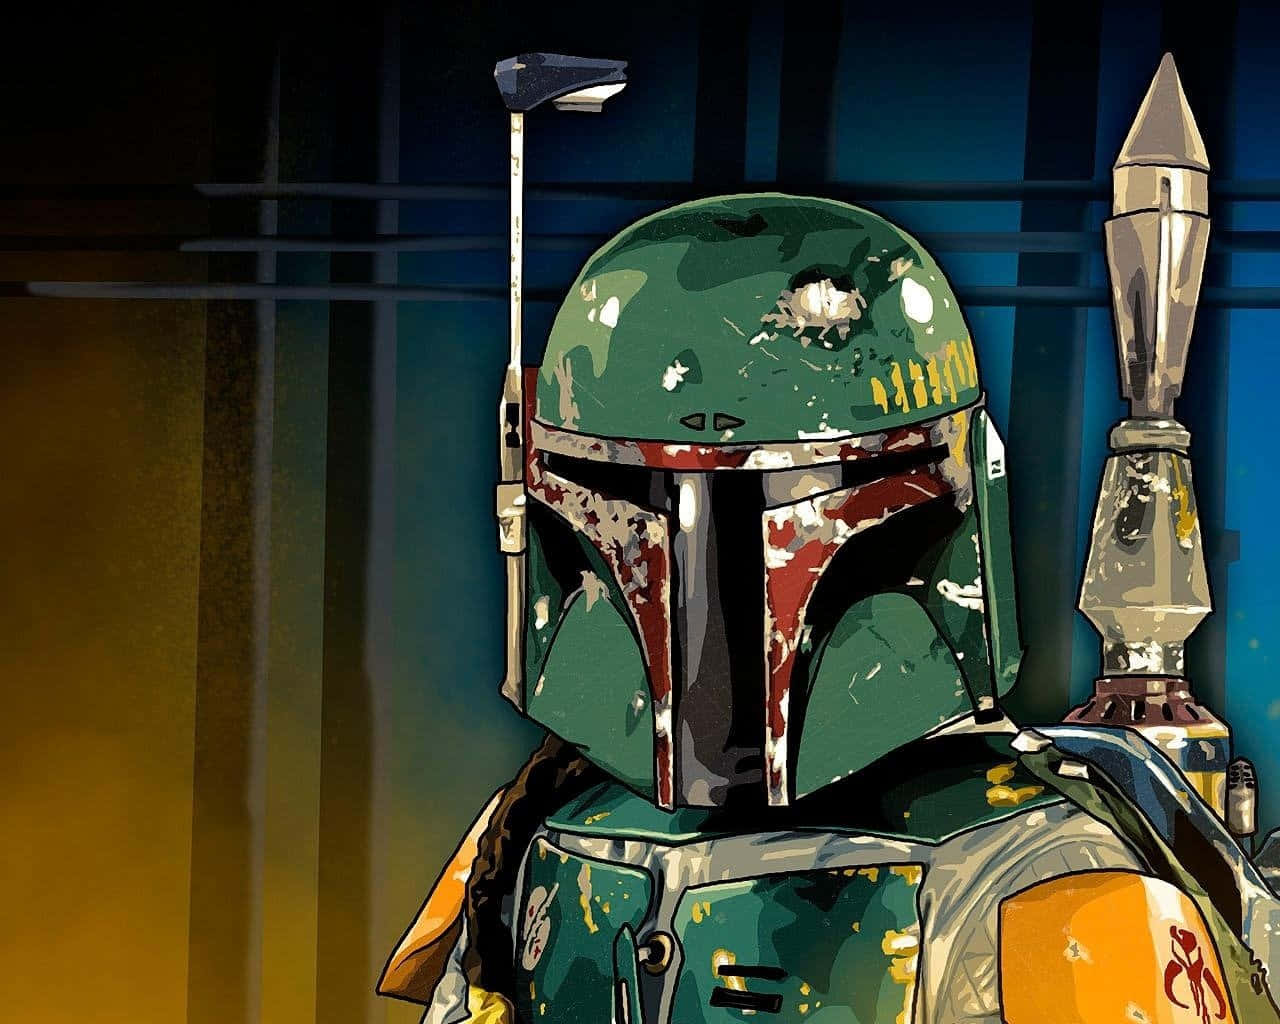 A detailed artistic rendition of the notorious bounty hunter, Boba Fett